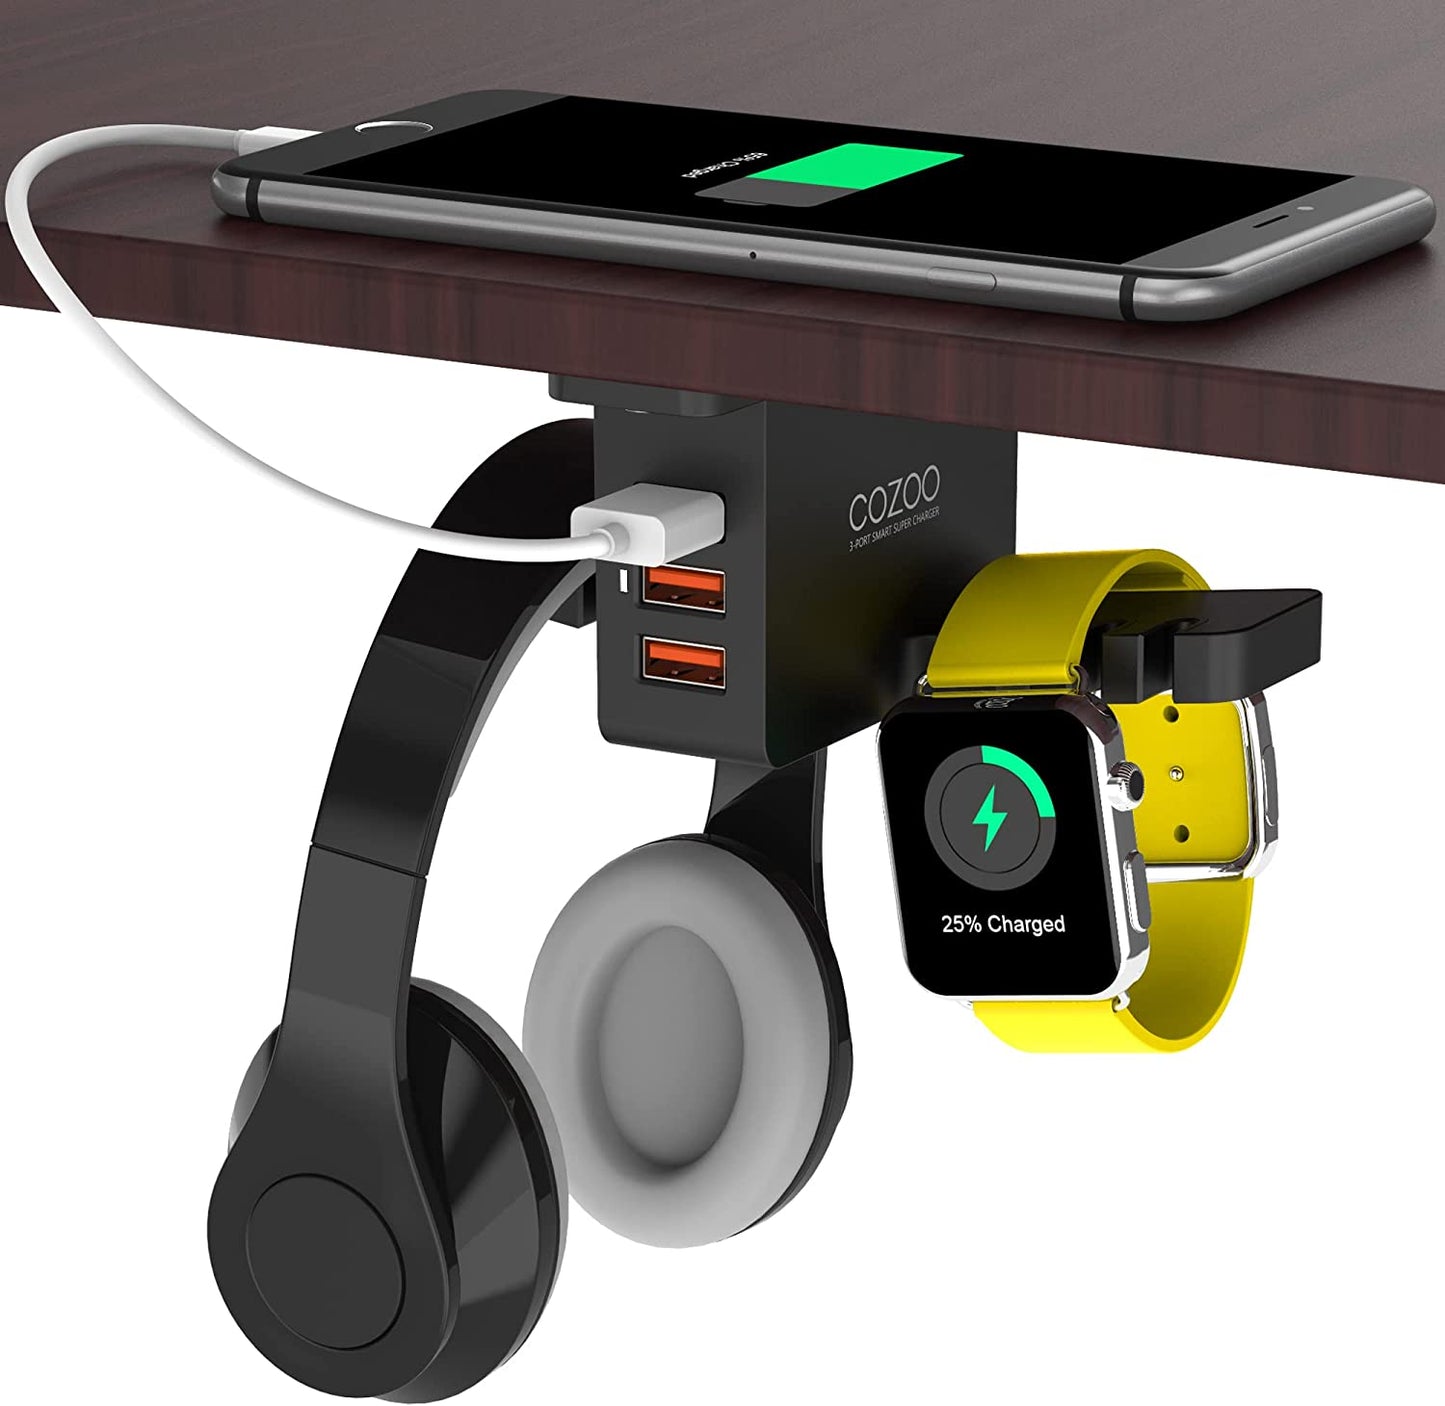 Under Desk Headphone Stand with USB Charger, 3 Port USB Charging Station, Iwatch Stand, and Dual Earphone Hanger Hook - UL Tested